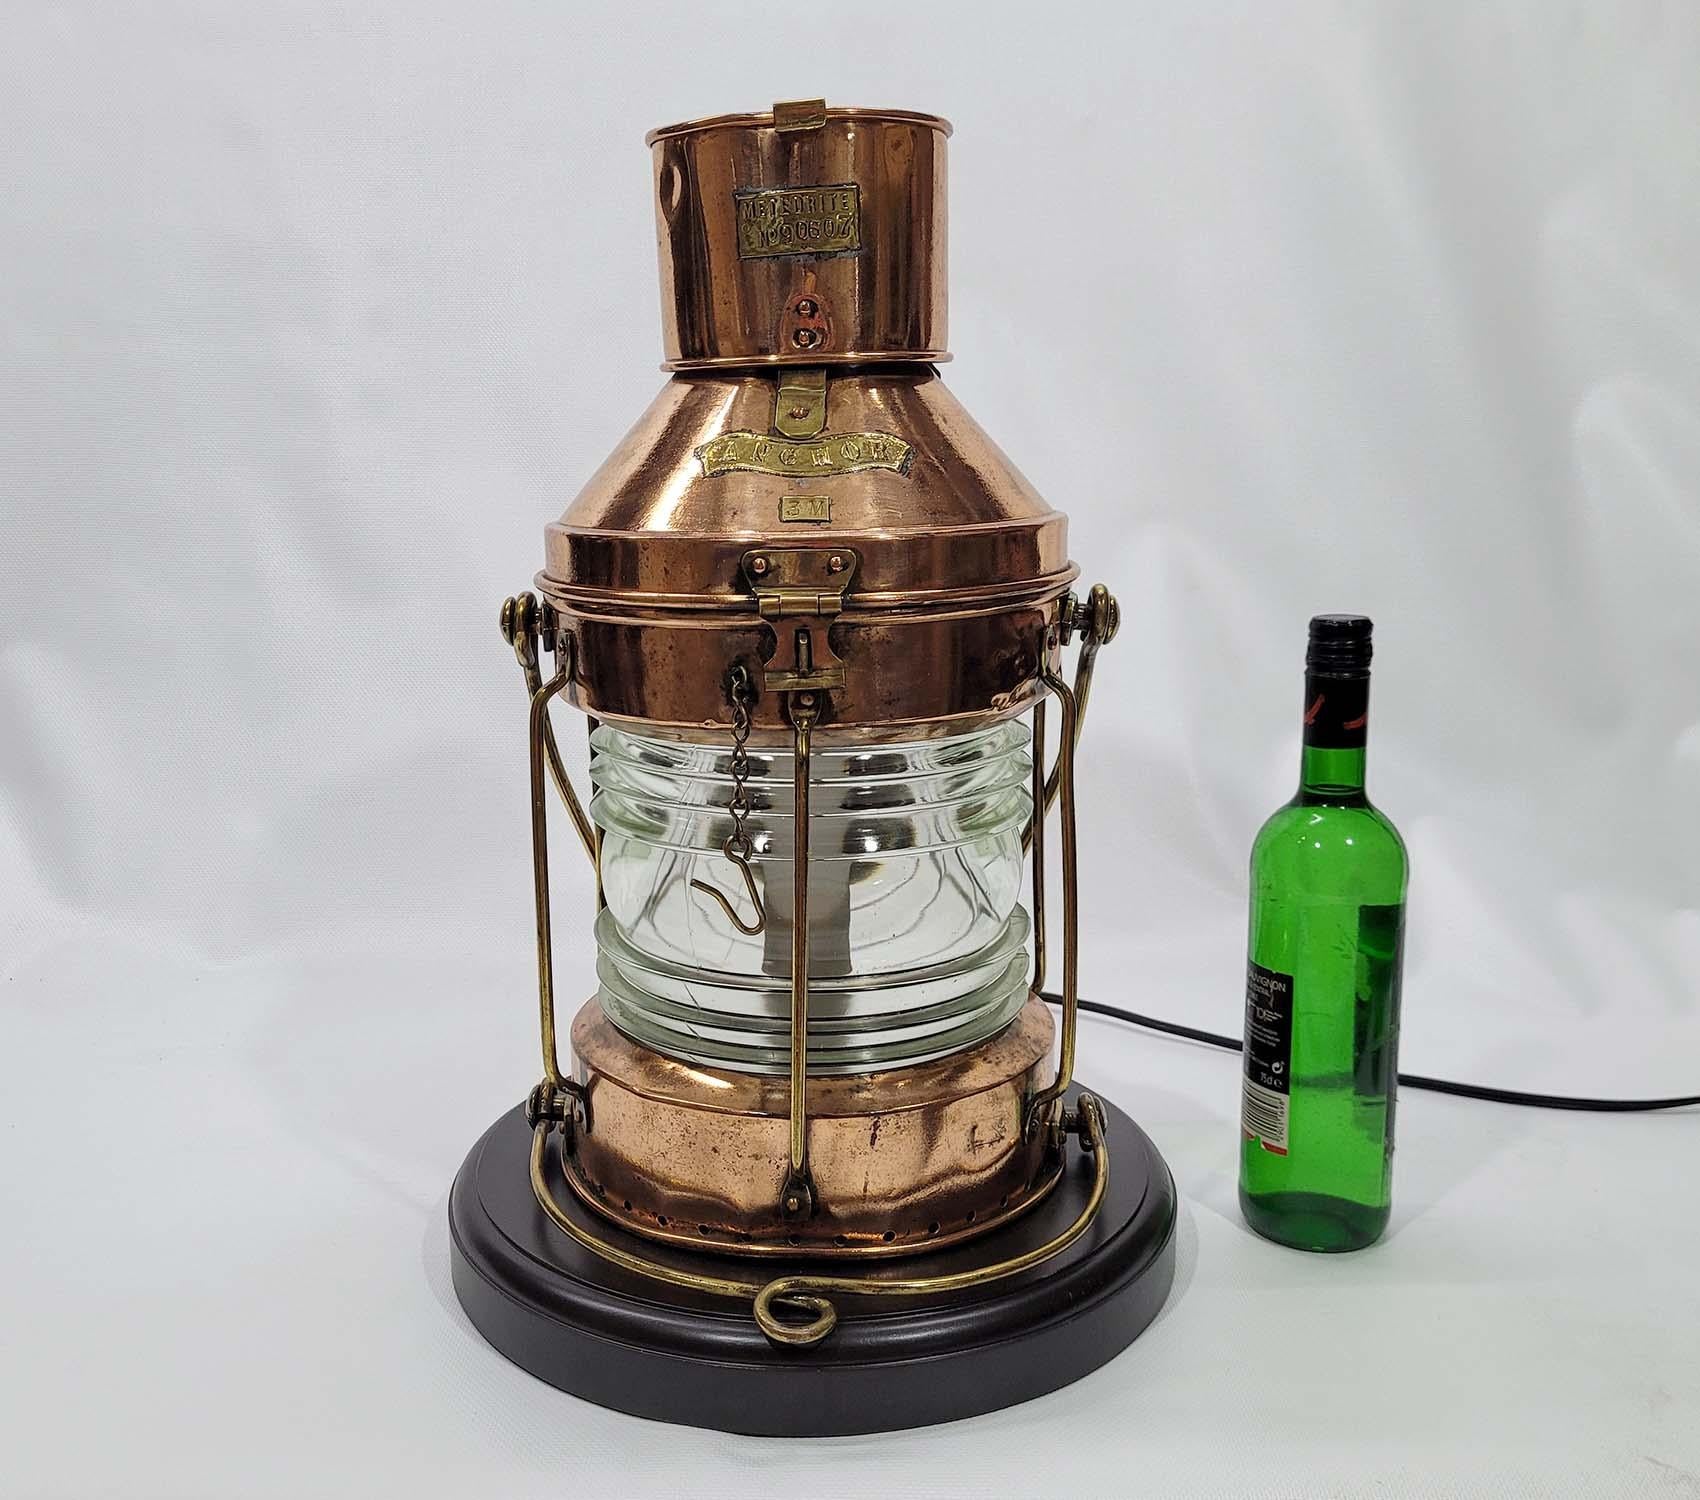 Copper ships anchor lantern by English Maker meteorite. With brass makers badge bearing serial number 90607. Clear glass Fresnel lens. Brass hoisting handle. Hinged top. Wired with electric circuit. Mounted to a thick wood base. This lantern has